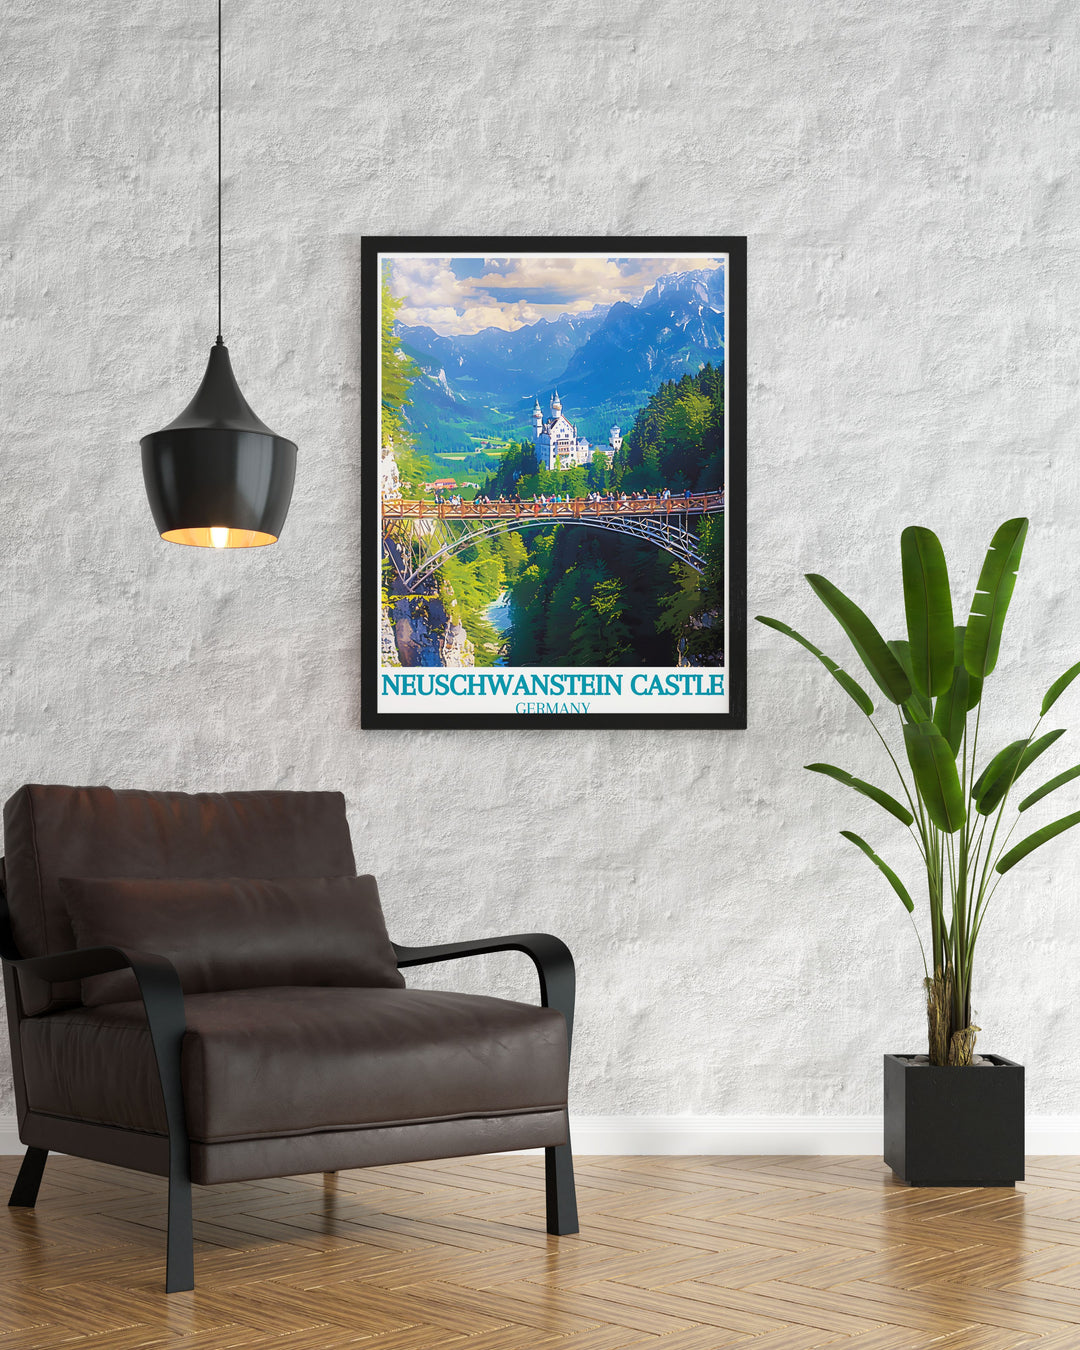 Featuring the stunning views from Marienbrücke, this poster showcases the dramatic landscape and picturesque setting of Neuschwanstein Castle, ideal for those who appreciate breathtaking scenery and architectural wonders.